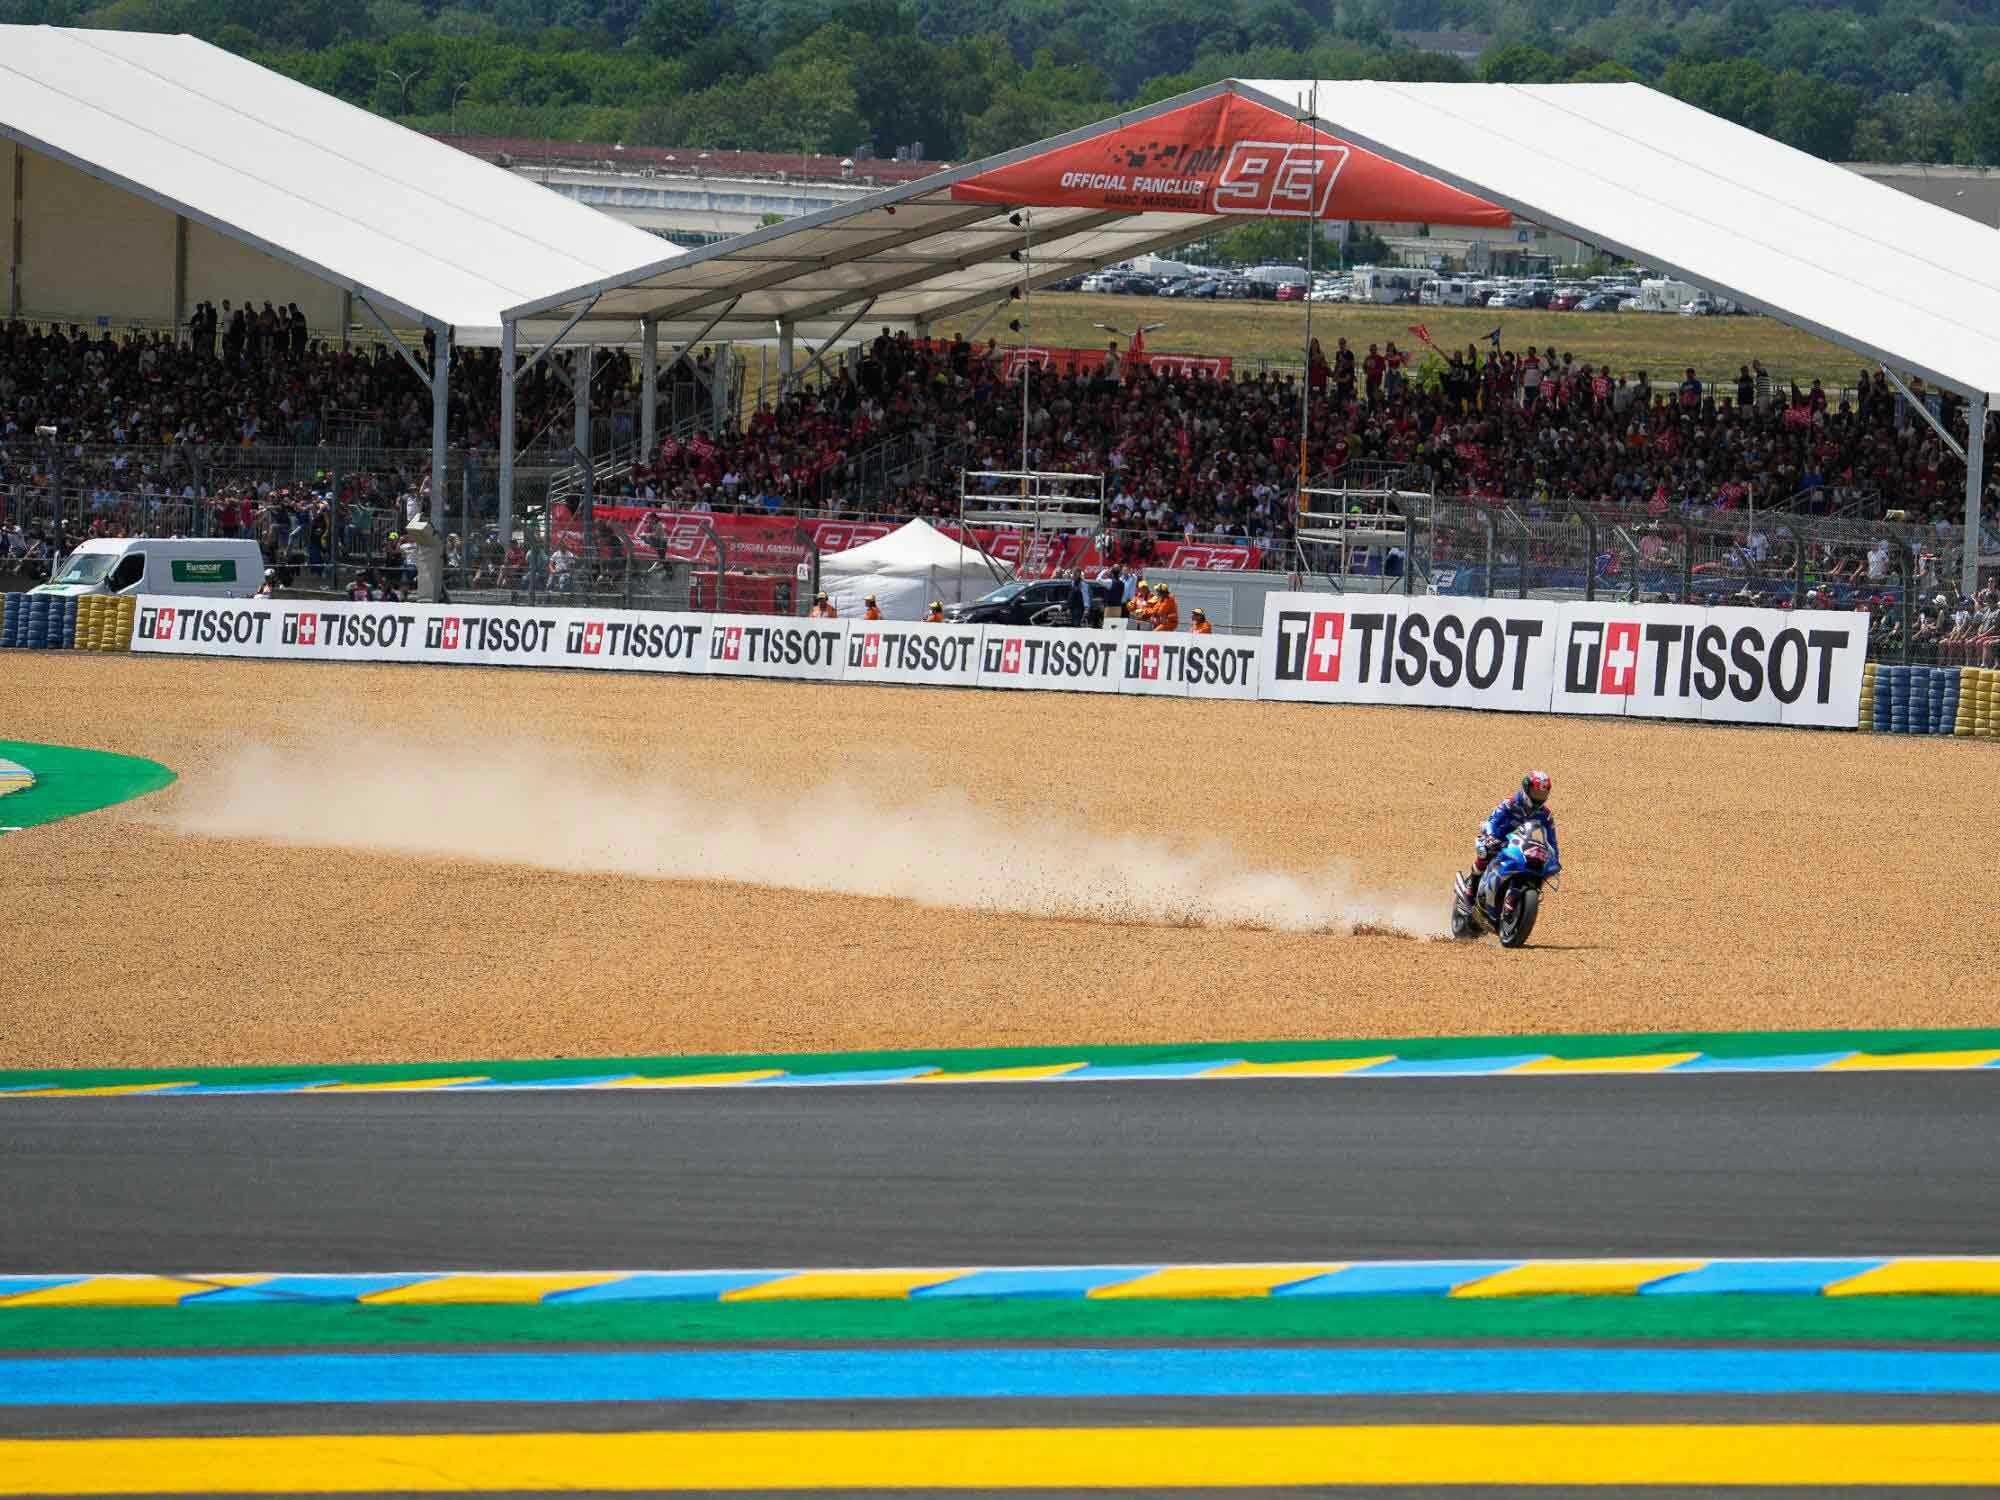 Suzuki’s planned withdrawal from MotoGP has been the talk of the pits. At Le Mans, neither Suzuki finished. Here, Álex Rins goes gardening on lap six. Teammate Joan Mir lasted until lap 14.